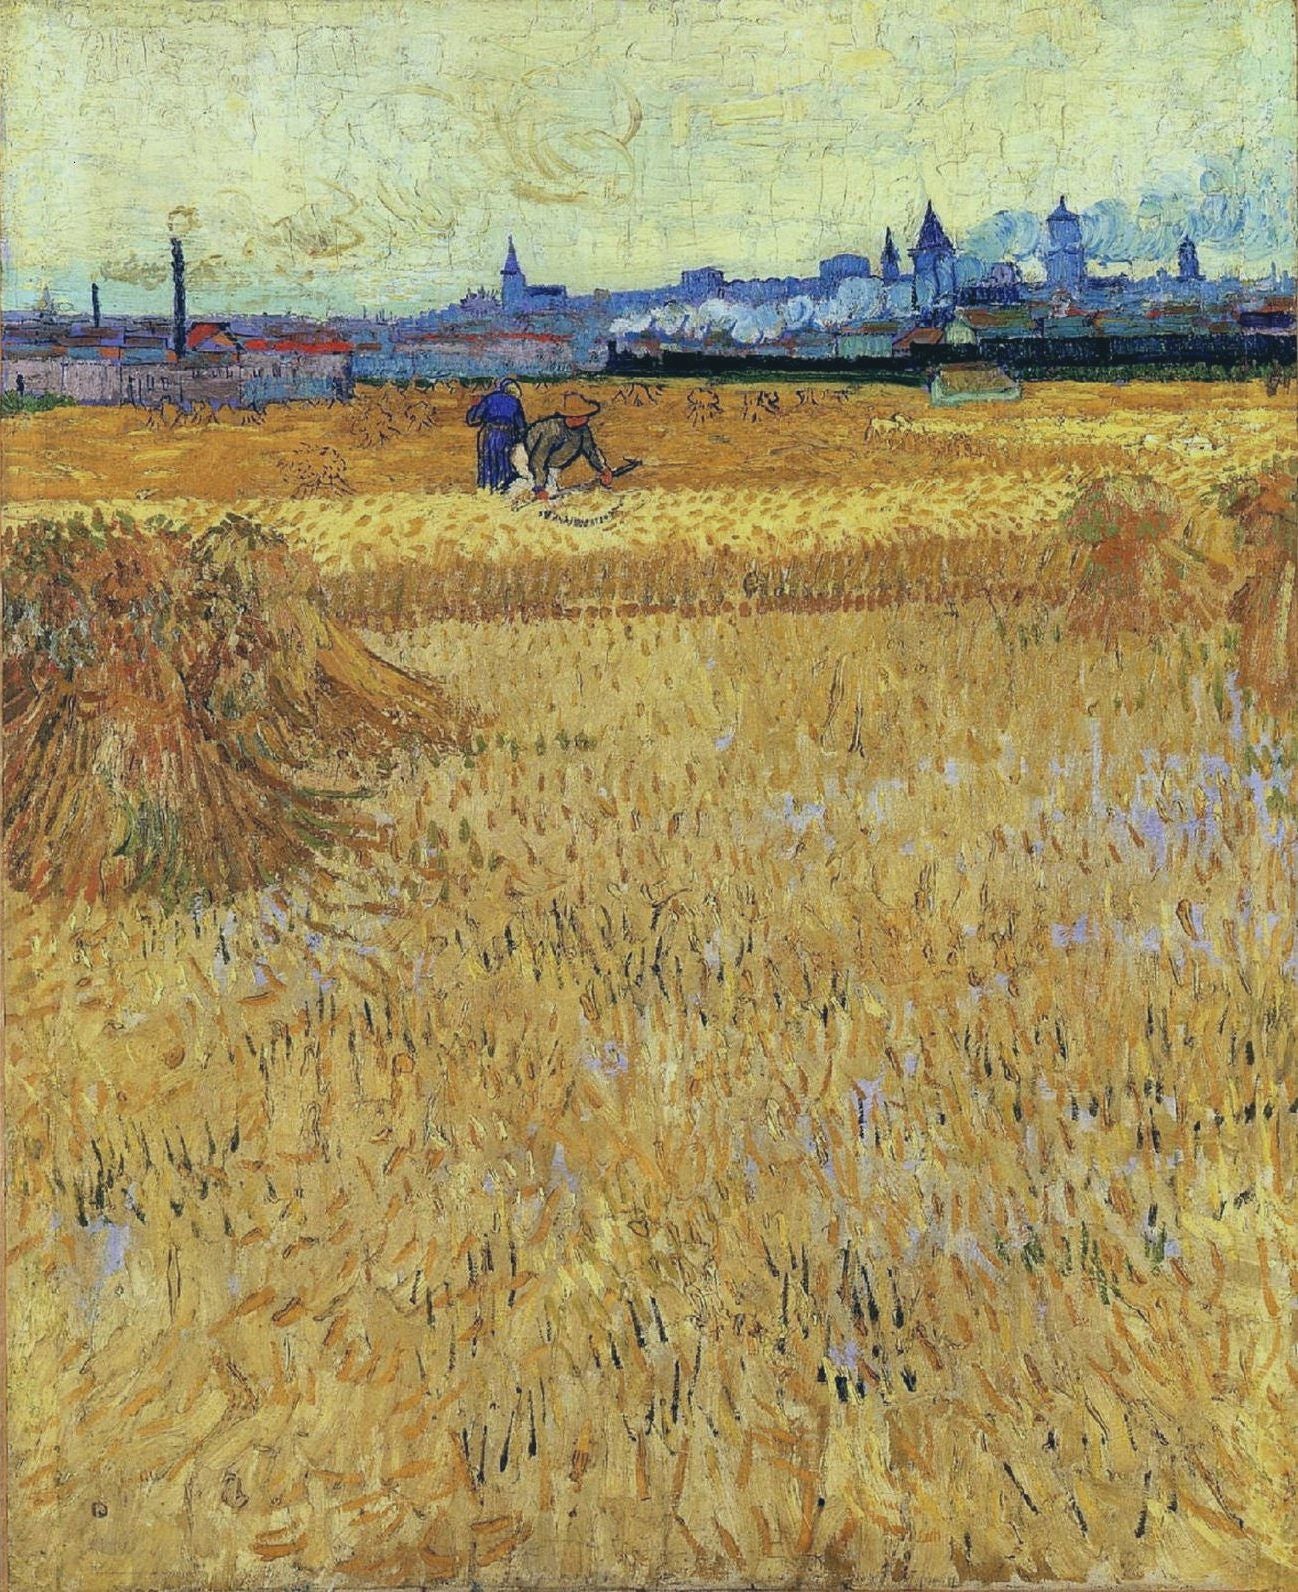 Arles - View from the Wheat Fields, 1888